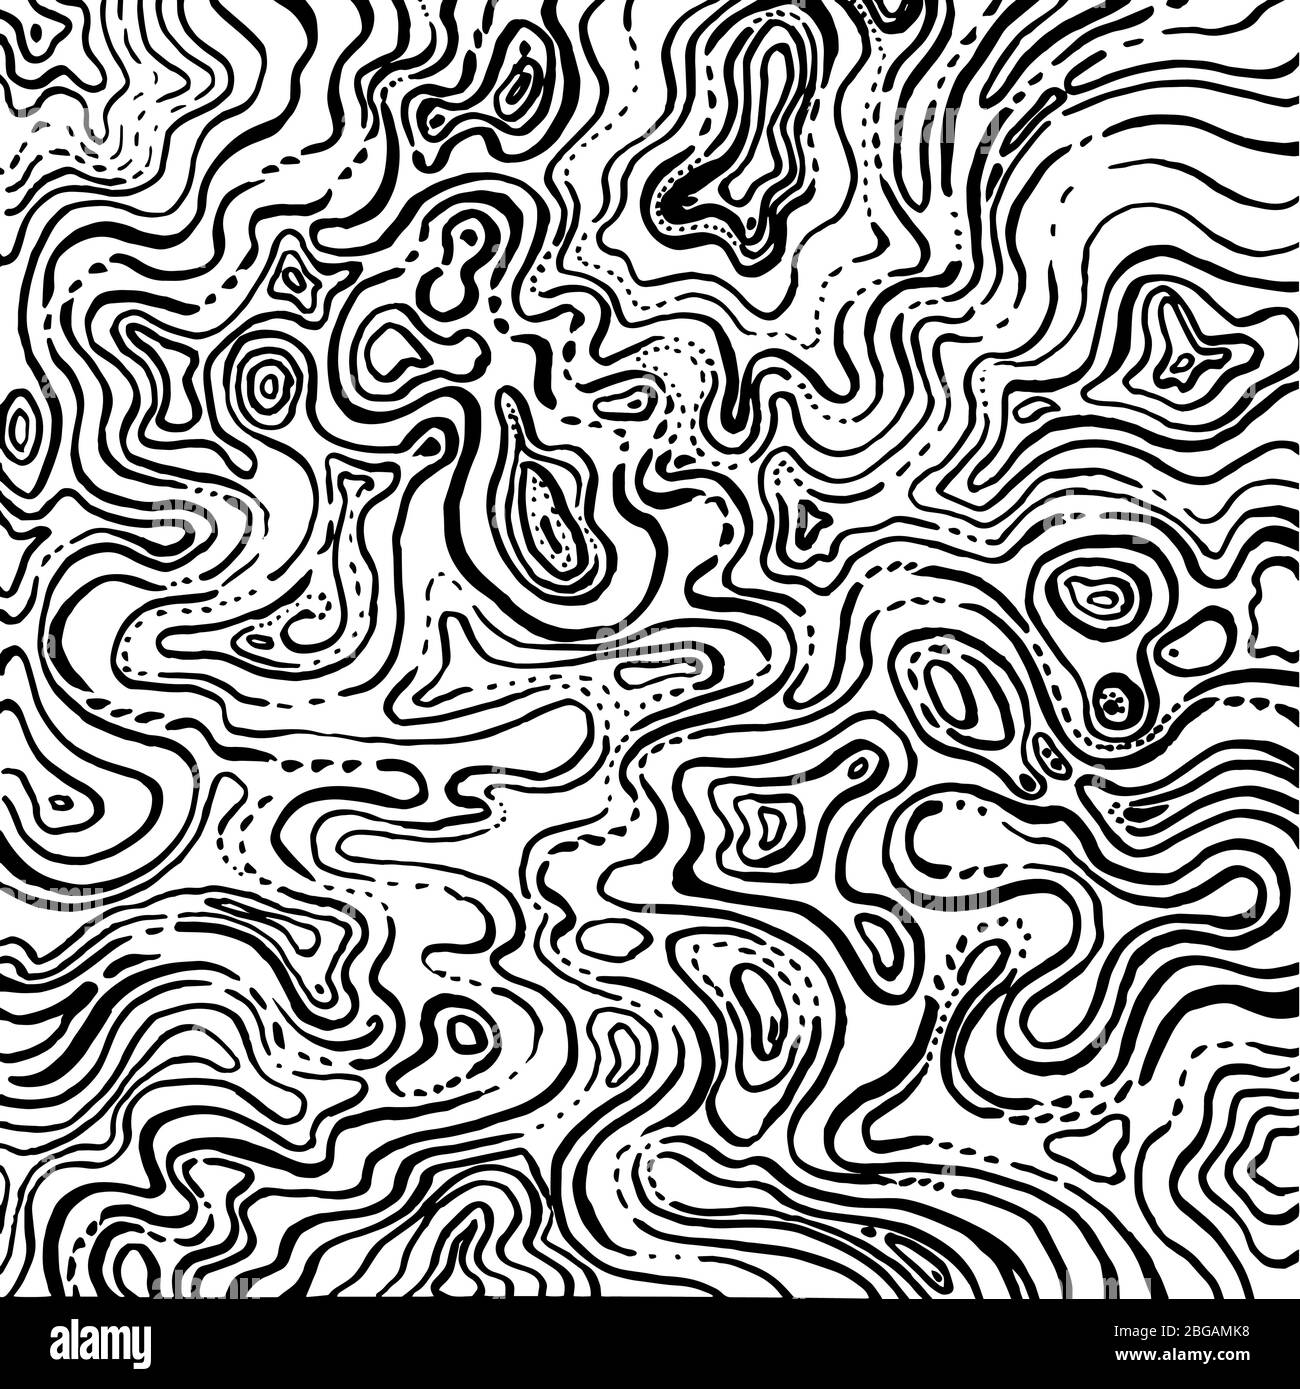 Abstract black and white background. A lot of chaotic curved lines create a pattern on the surface, chaotic and abstract, hand-drawn graphics. Stock Vector